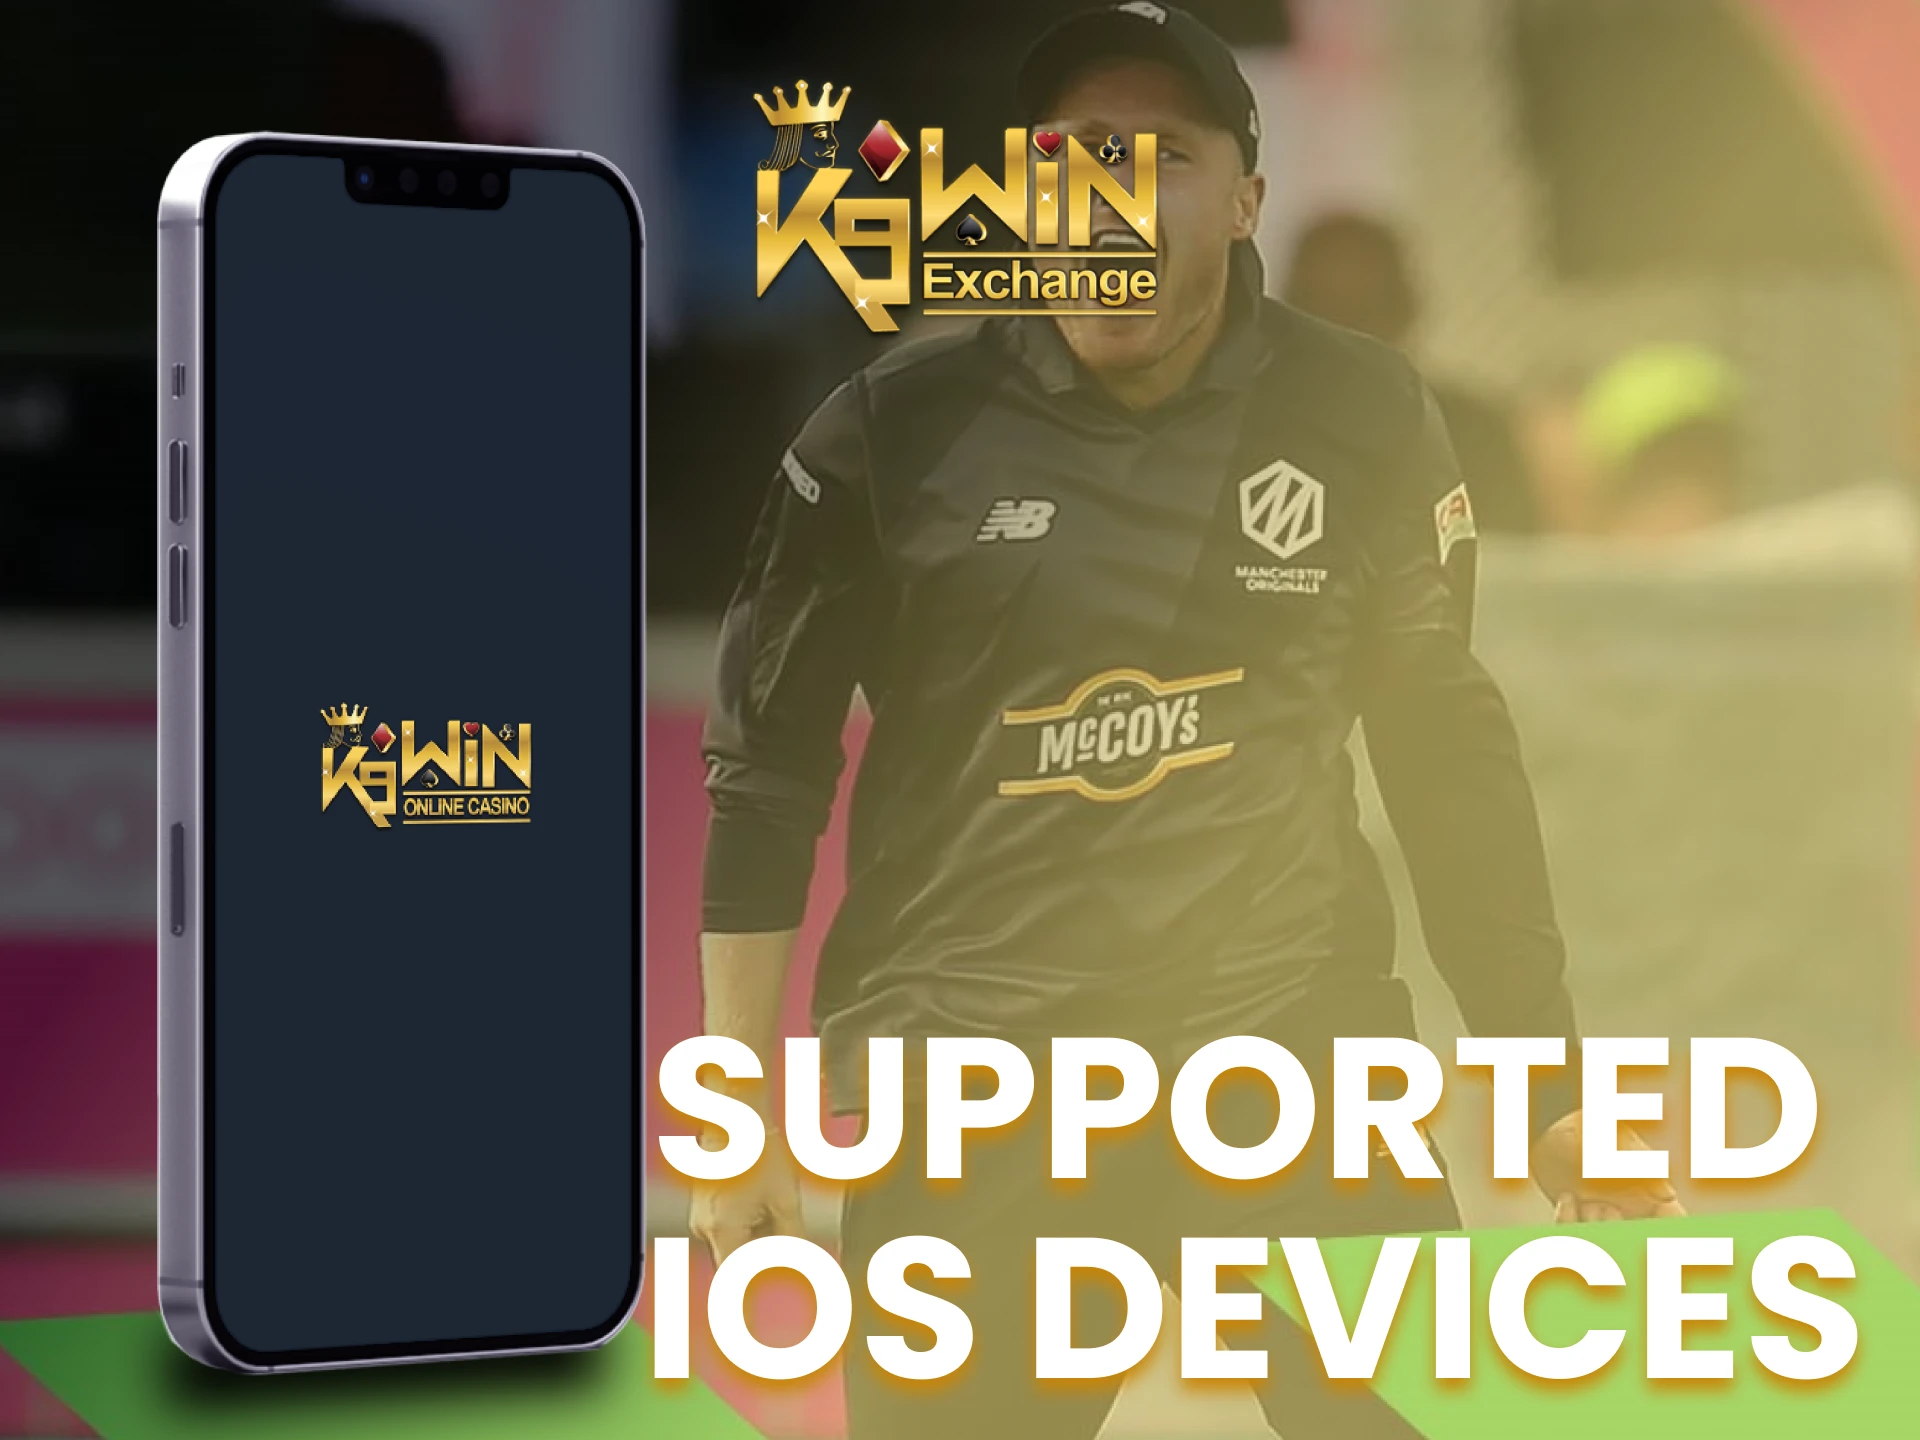 You can install the K9Win iOS app on all of modern Apple devices.